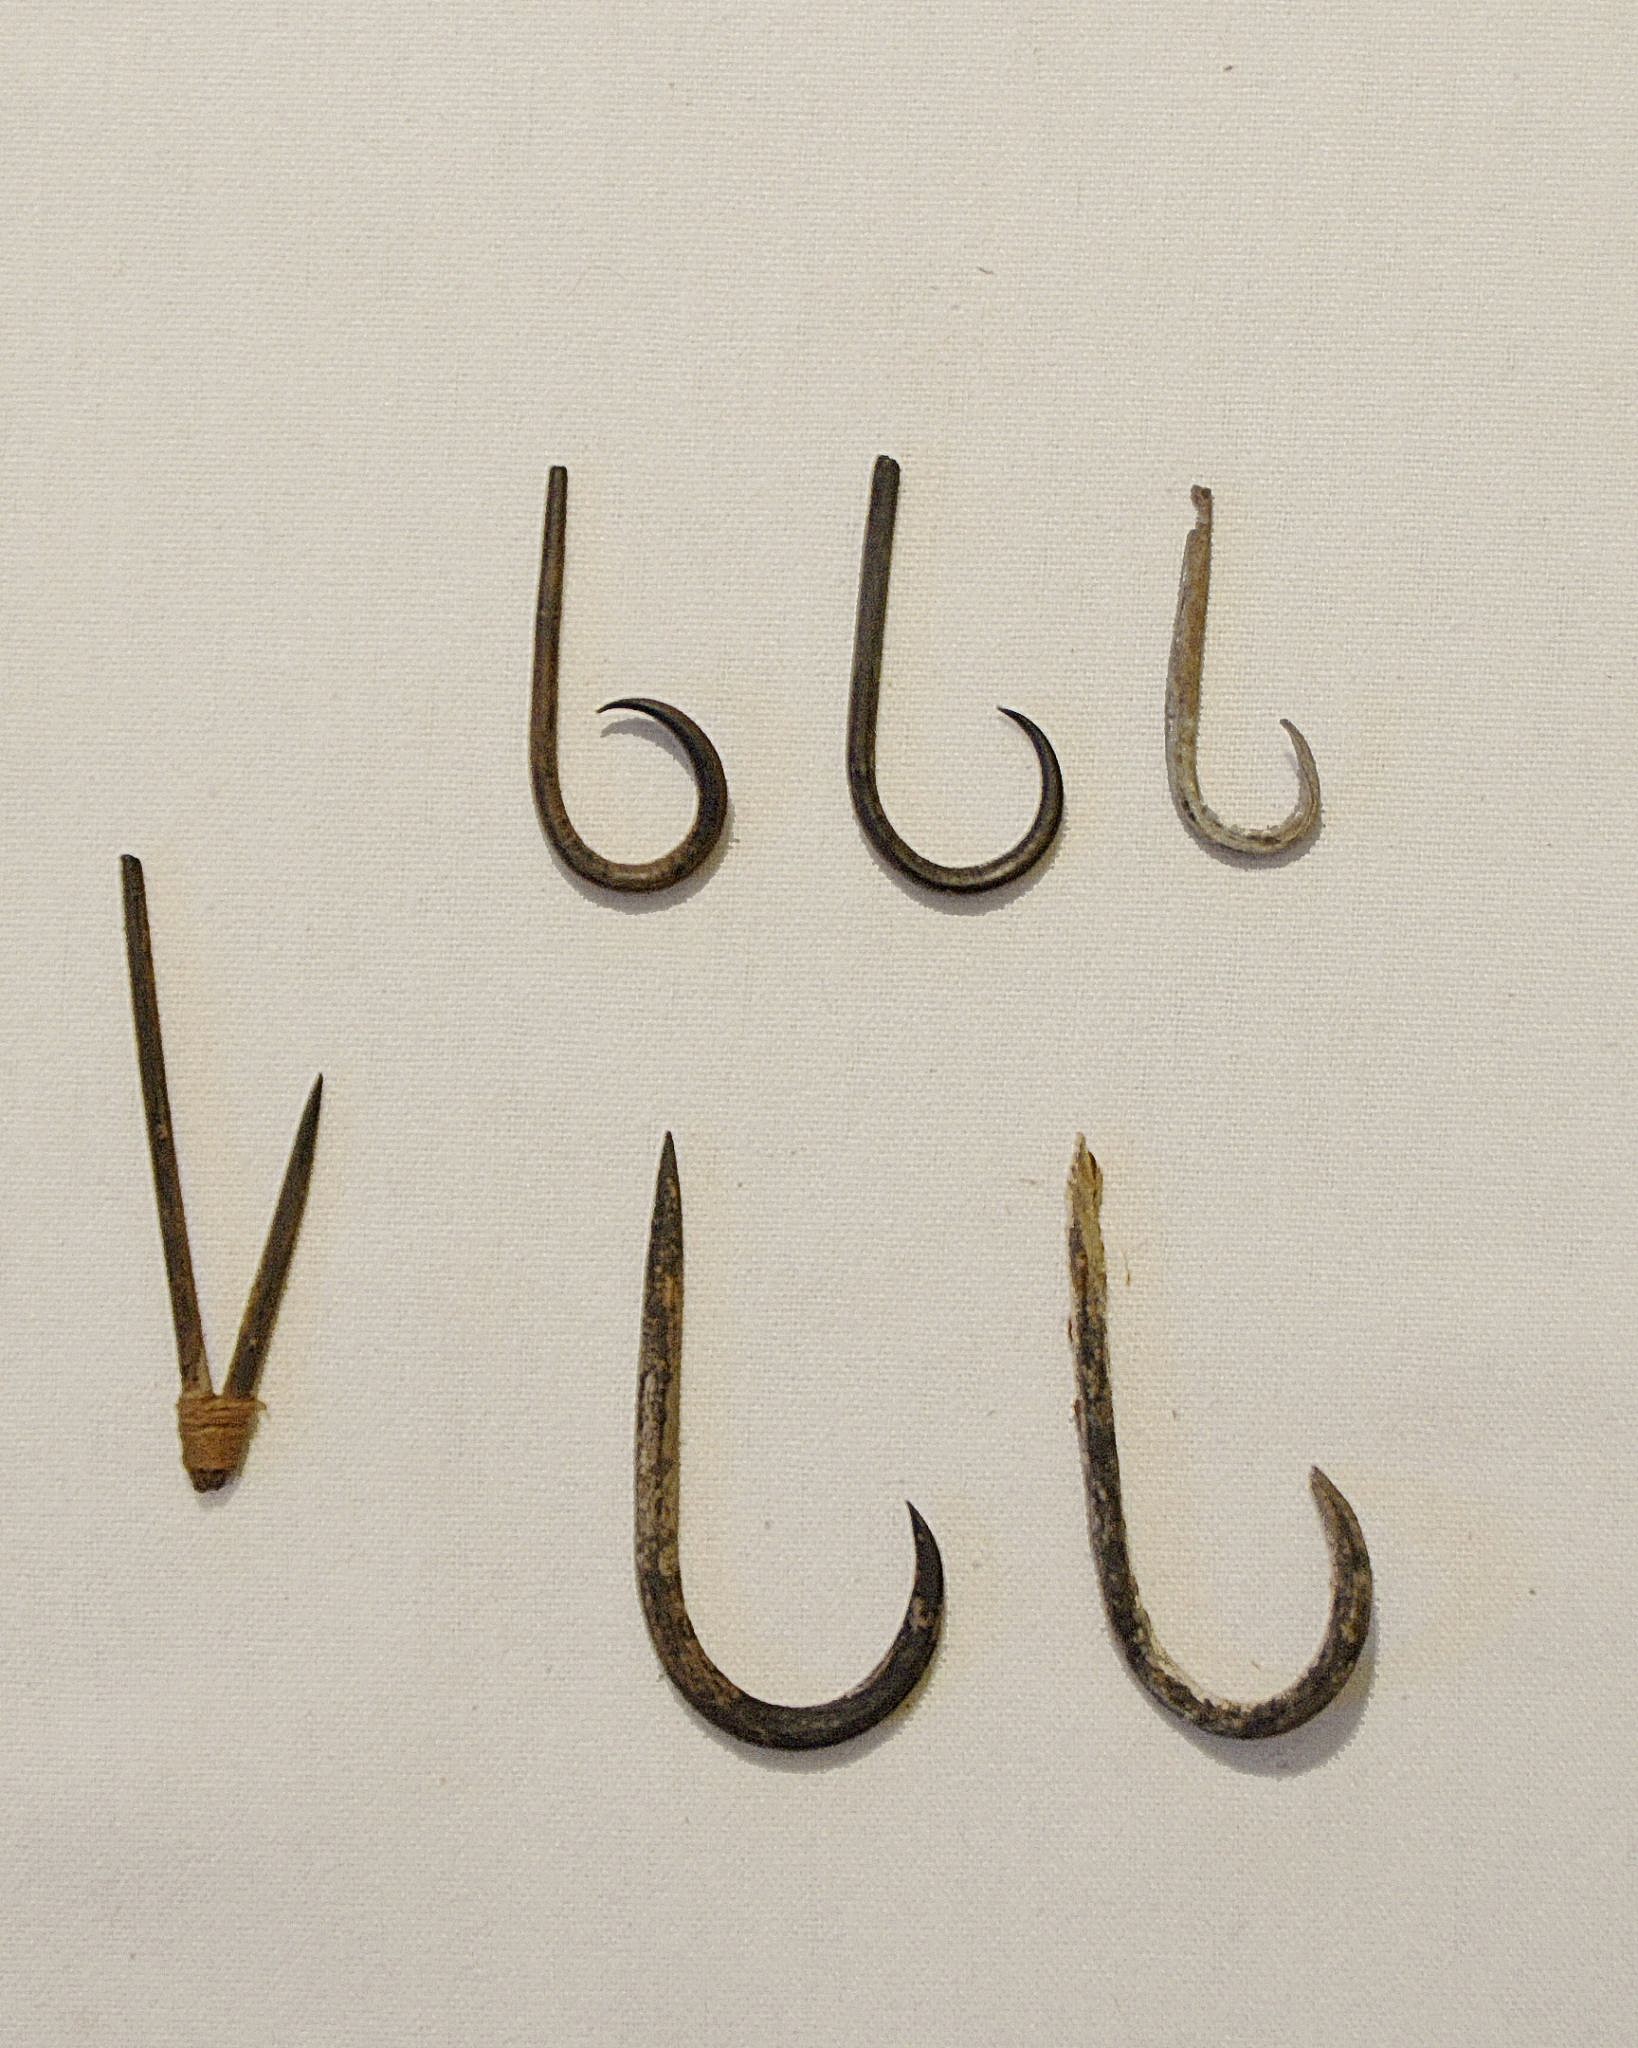 Chile, Six Cactus Thorn Fish Hooks
The thorns were curved with heat and the points were occasionally sharpened with a flat stone.  These hooks each have a notch at the opposite end to secure cotton line.  The two-part hook was an earlier development before the curved hook was invented.
Media: Wood
Dimensions: Lengths Vary: 1"- 2"
n6033